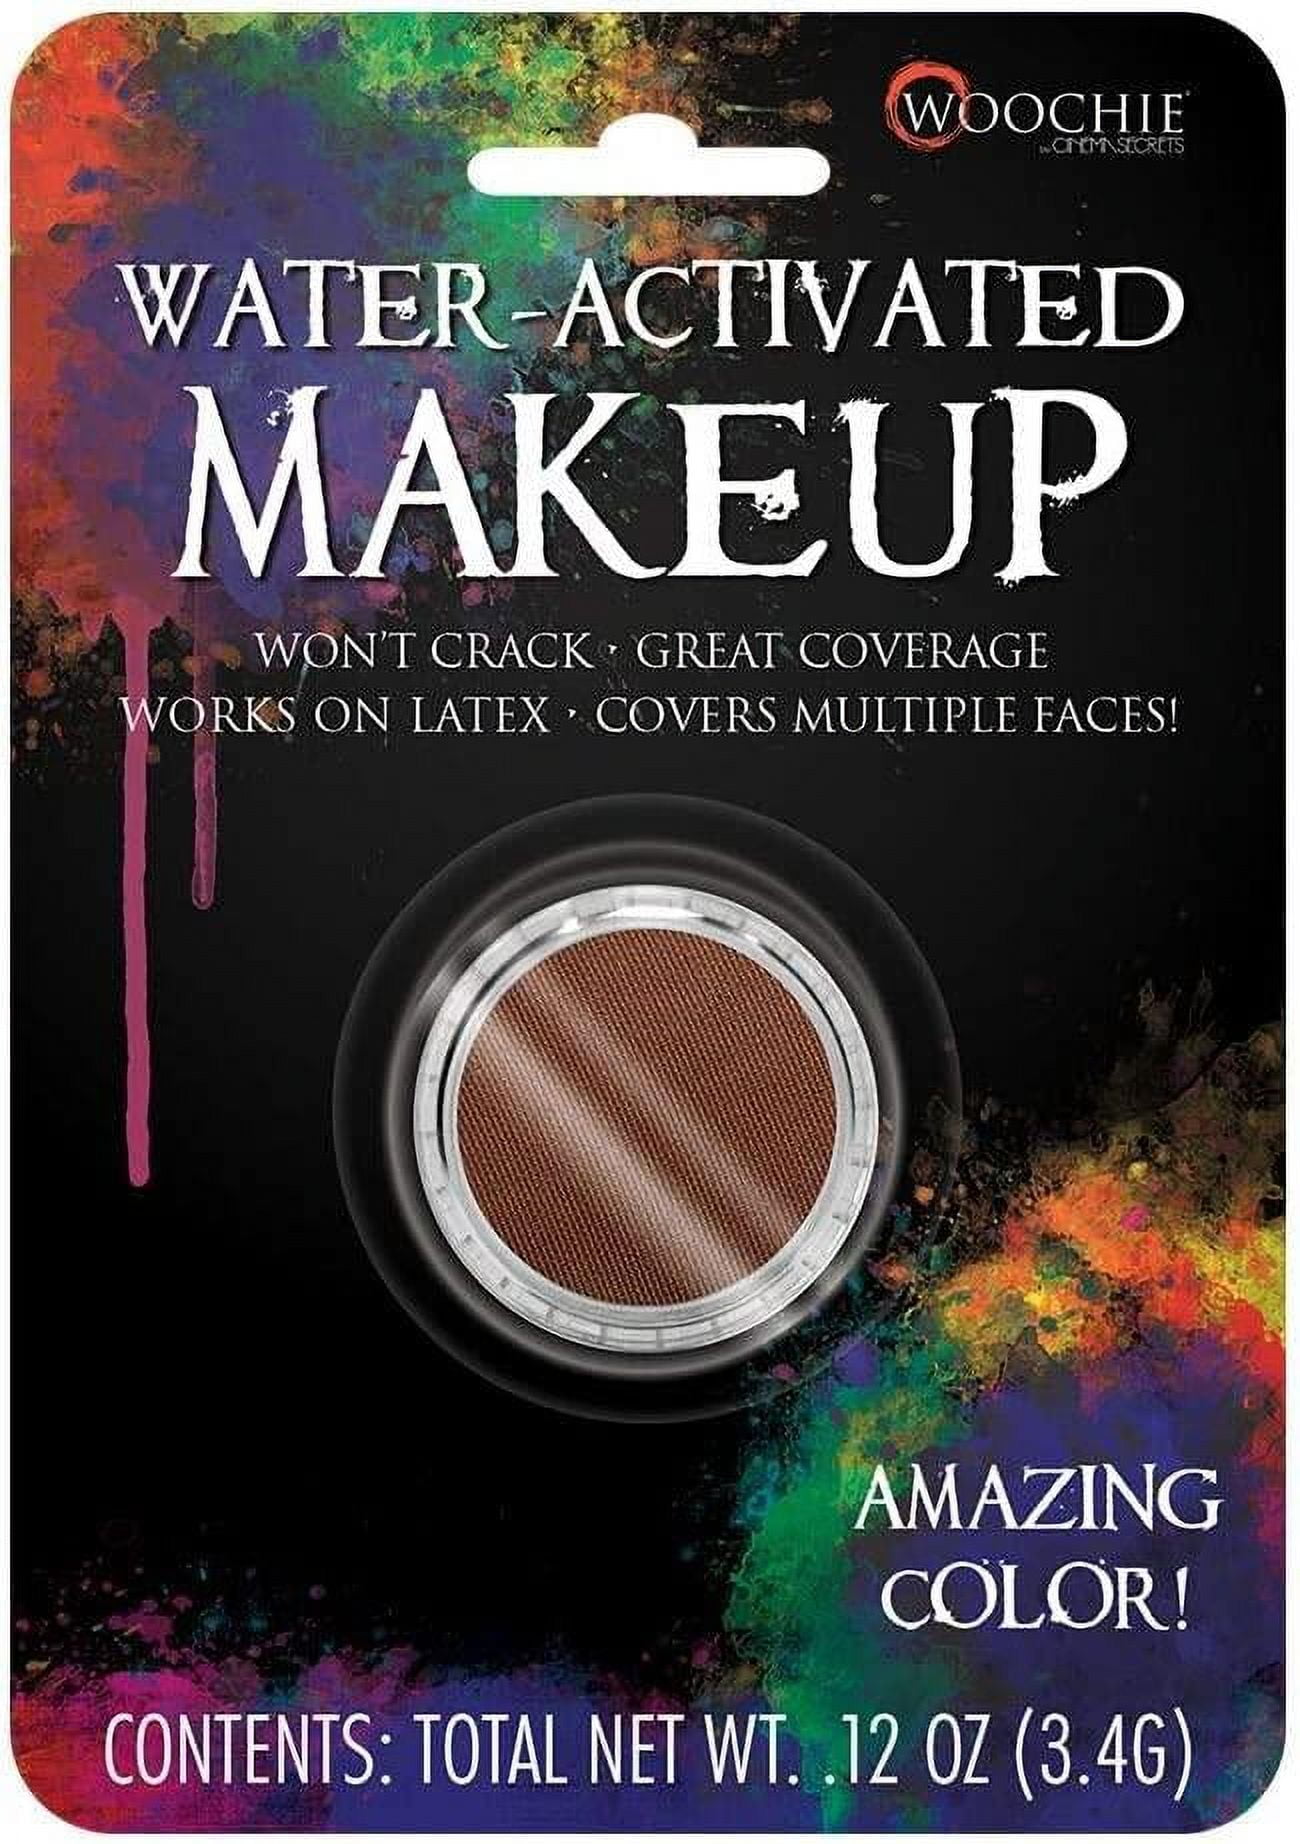  Woochie Water Activated Makeup Kit - Professional